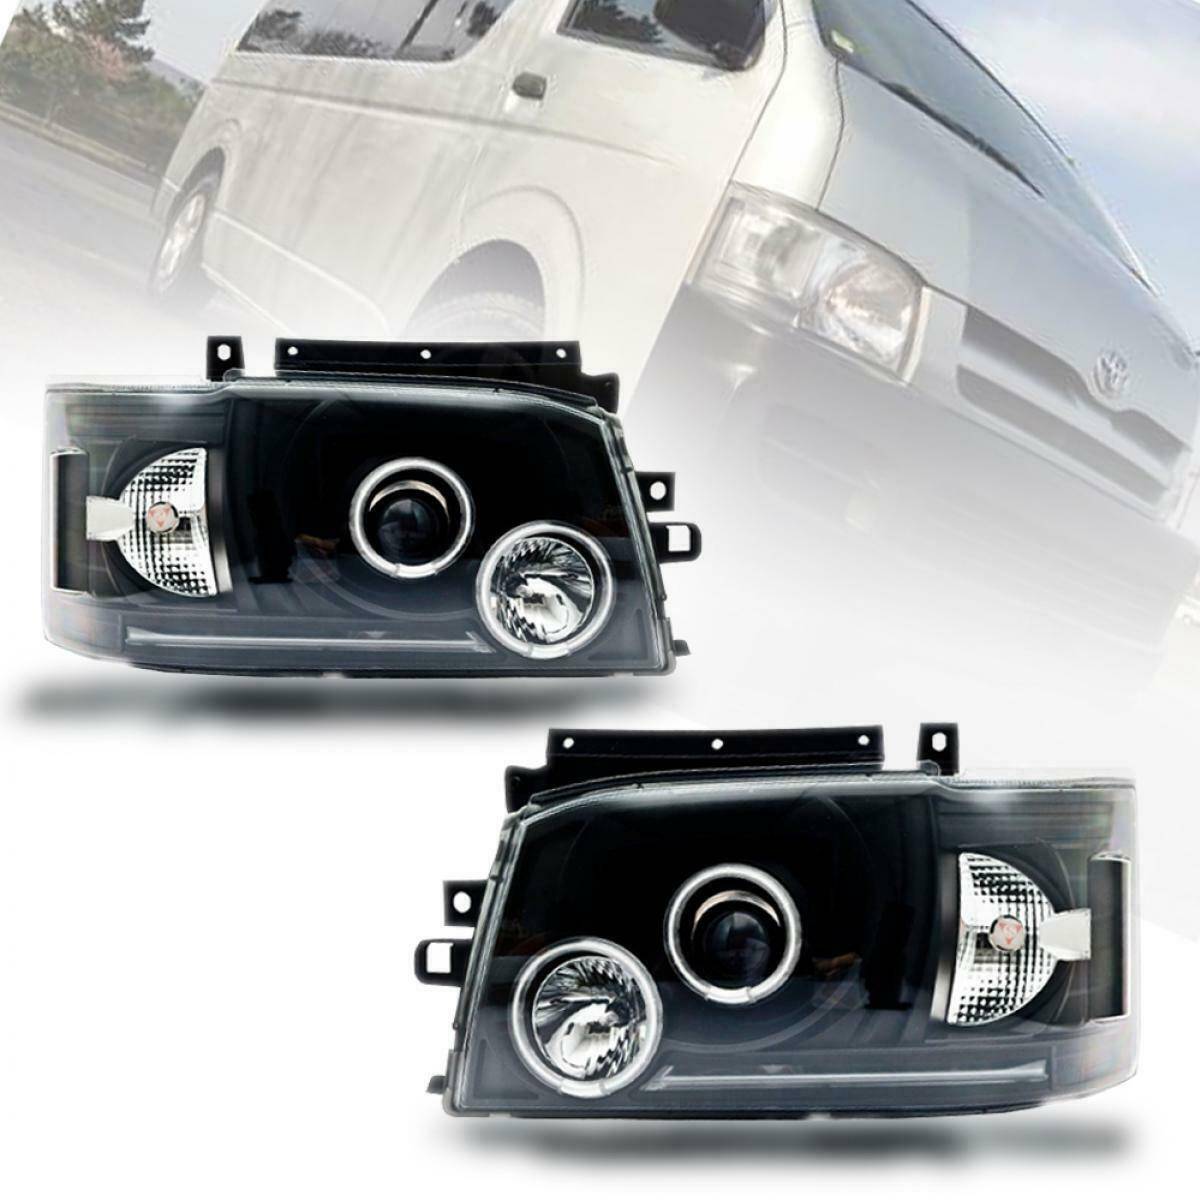 Toyota Hiace 2005 -2010 Halo Projector Head Light Pair (Online Only)